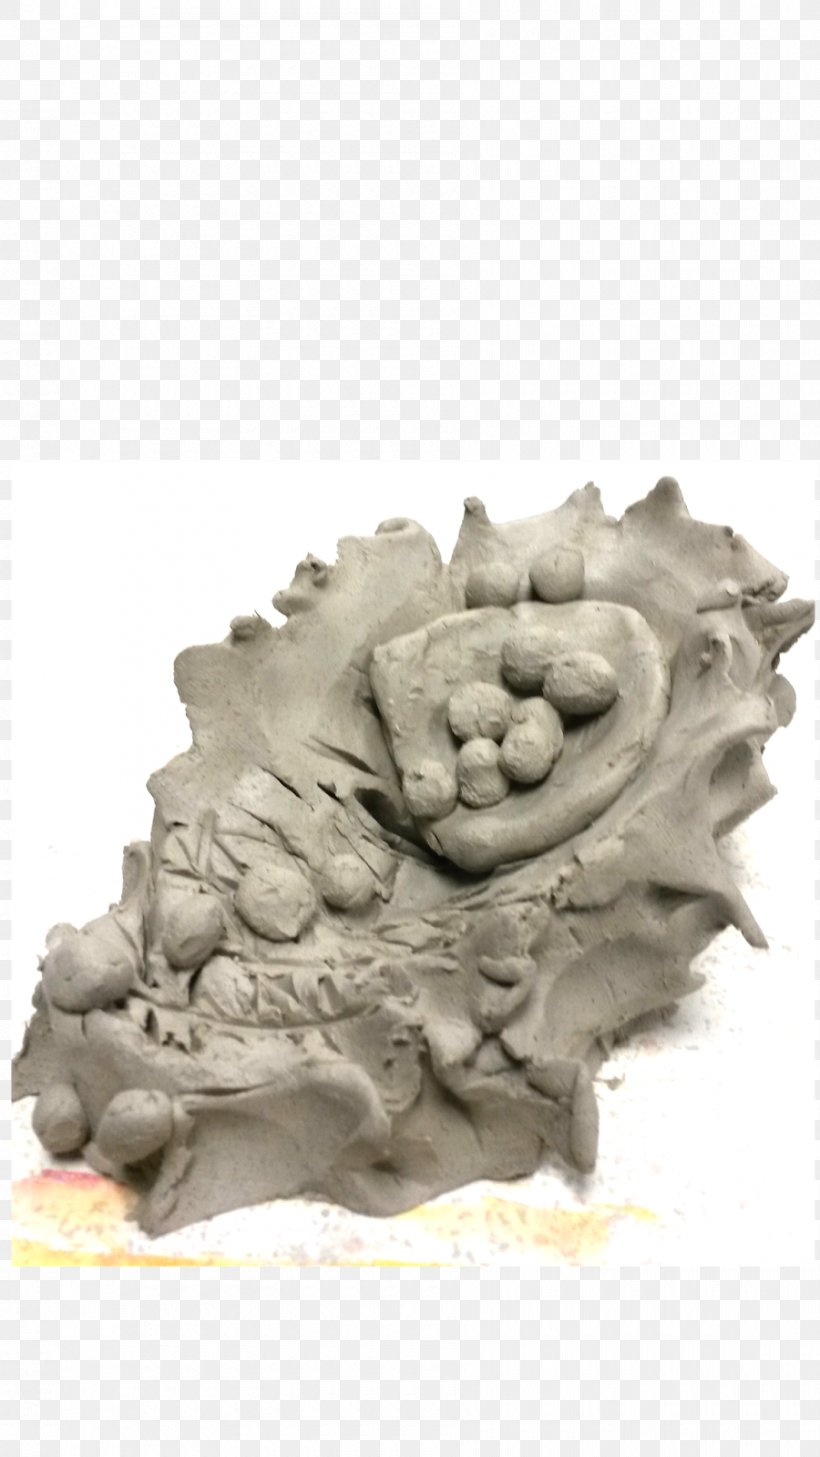 Stone Carving Rock, PNG, 900x1600px, Stone Carving, Carving, Rock Download Free